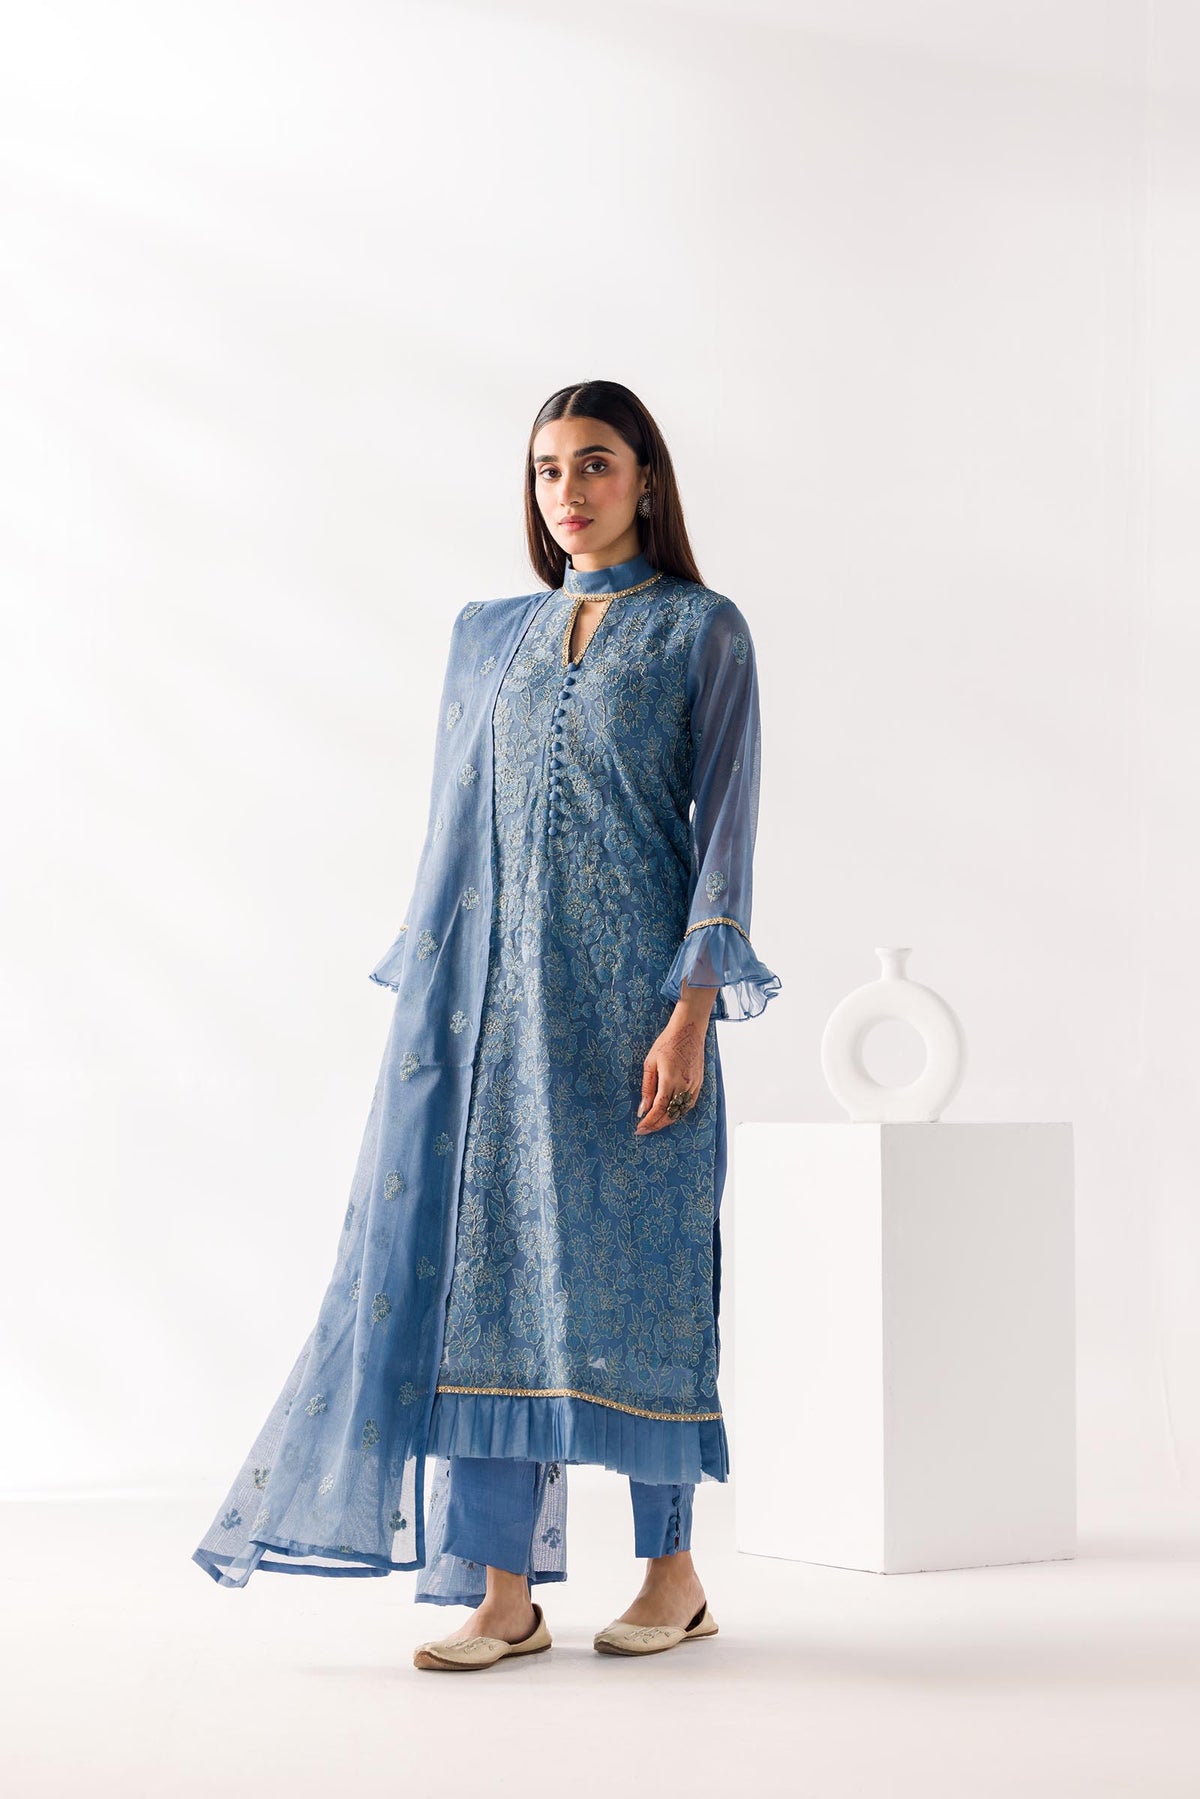 TaanaBaana | Luxe Line | F0388A - Khanumjan  Pakistani Clothes and Designer Dresses in UK, USA 